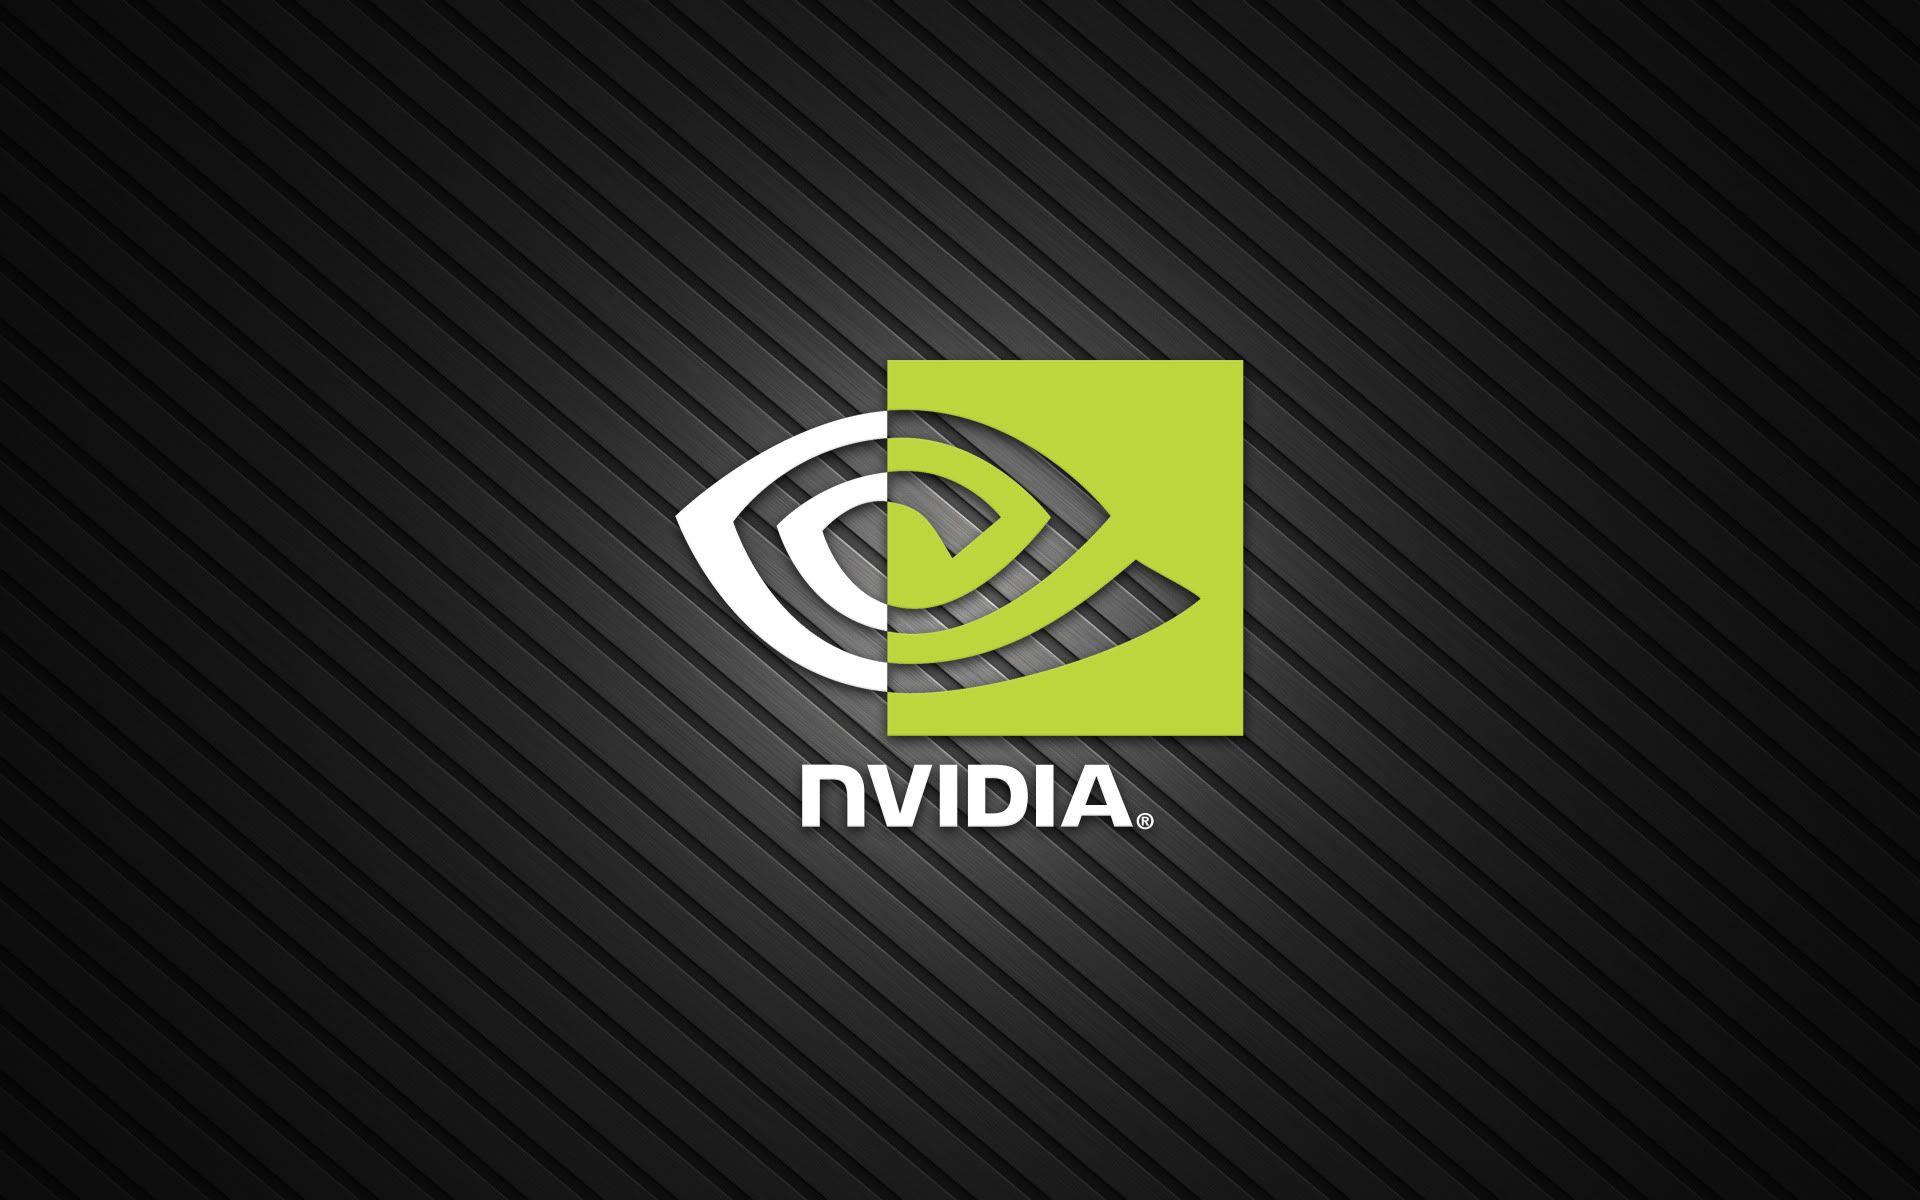 Tales of a Technician: Nvidia and the Tale of ROTI